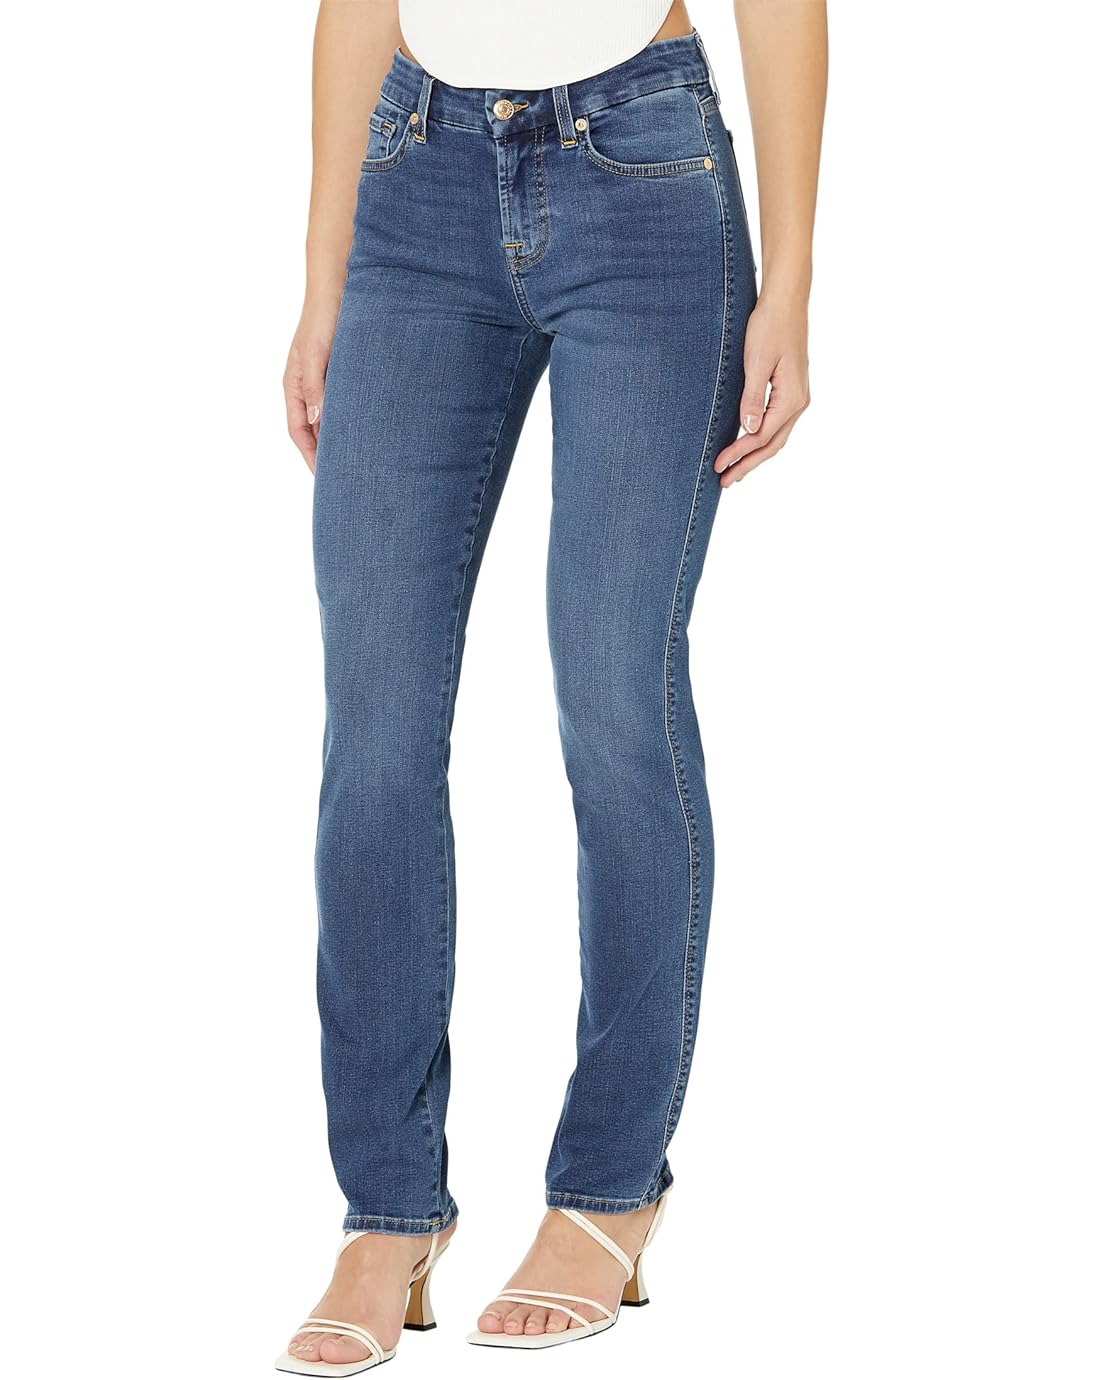 7 For All Mankind B(air) Kimmie Straight in Duchess